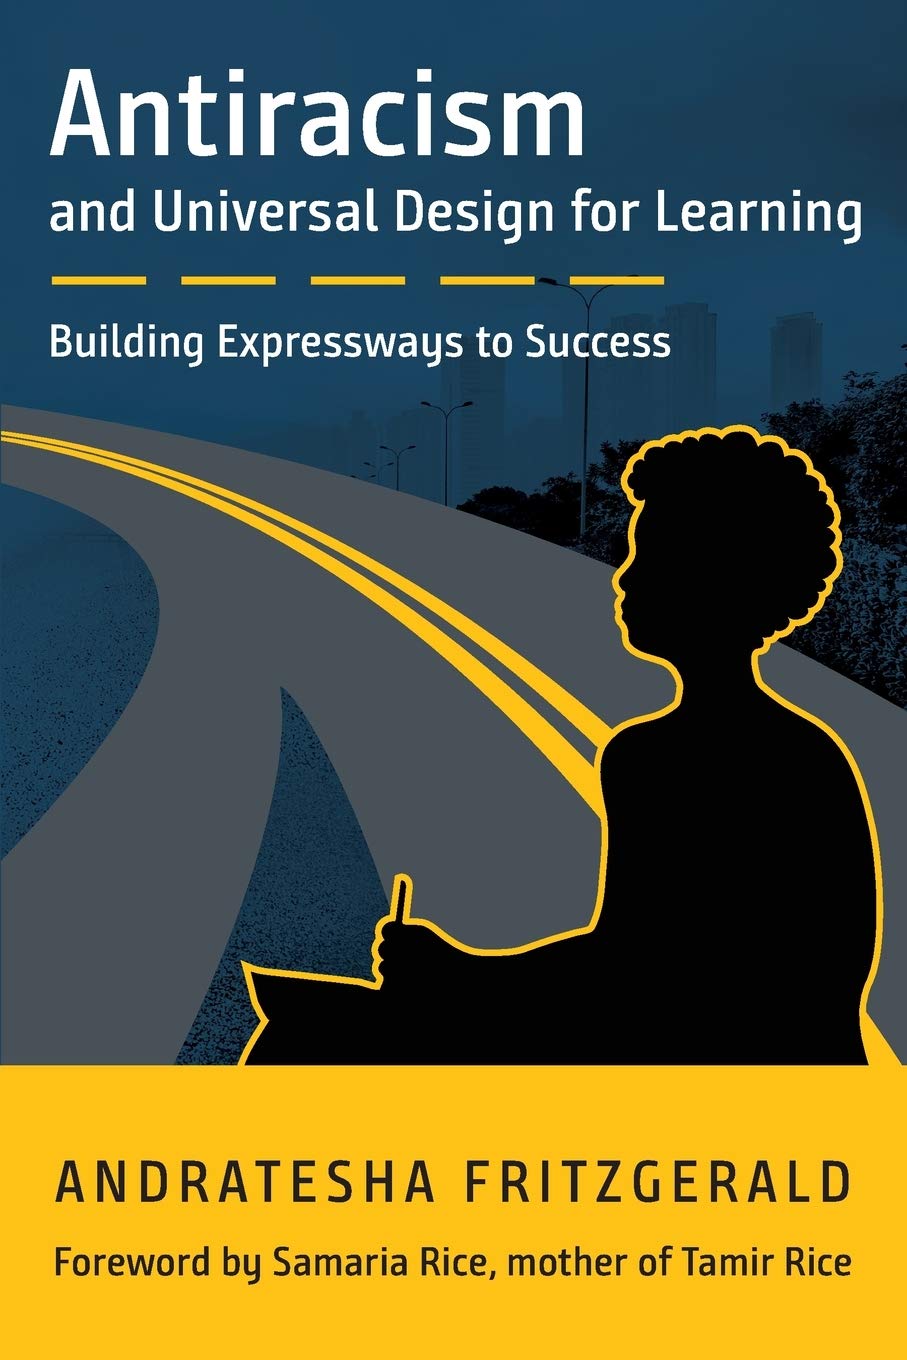 Antiracism and Universal Design for Learning: Building Expressways to Success